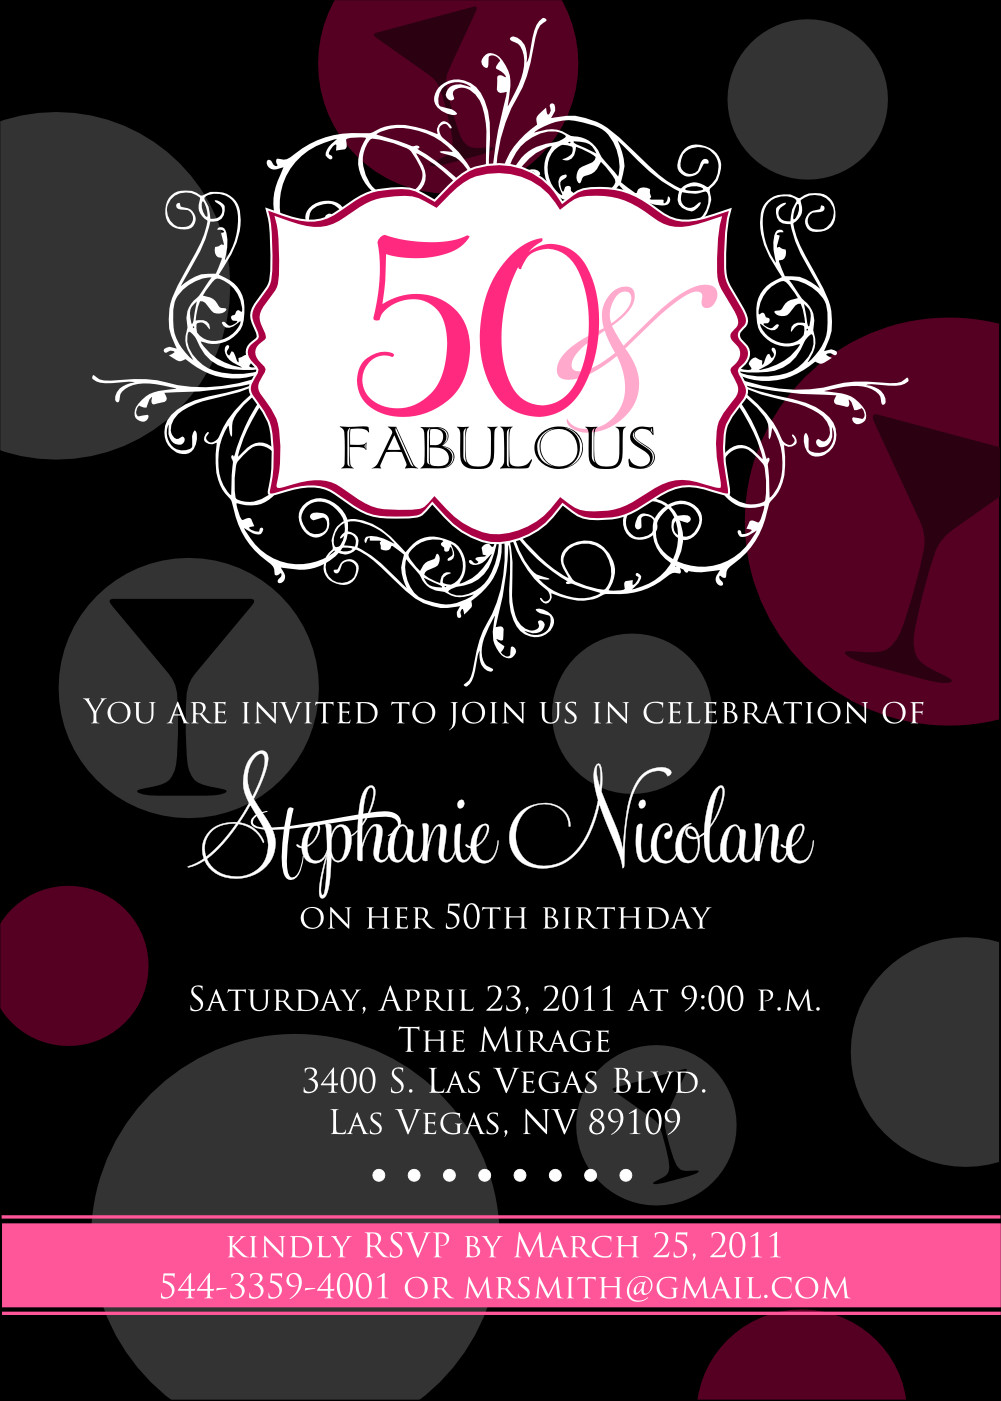 50th Birthday Party Invitation Template
 Signatures by Sarah Fabulous 50th birthday party